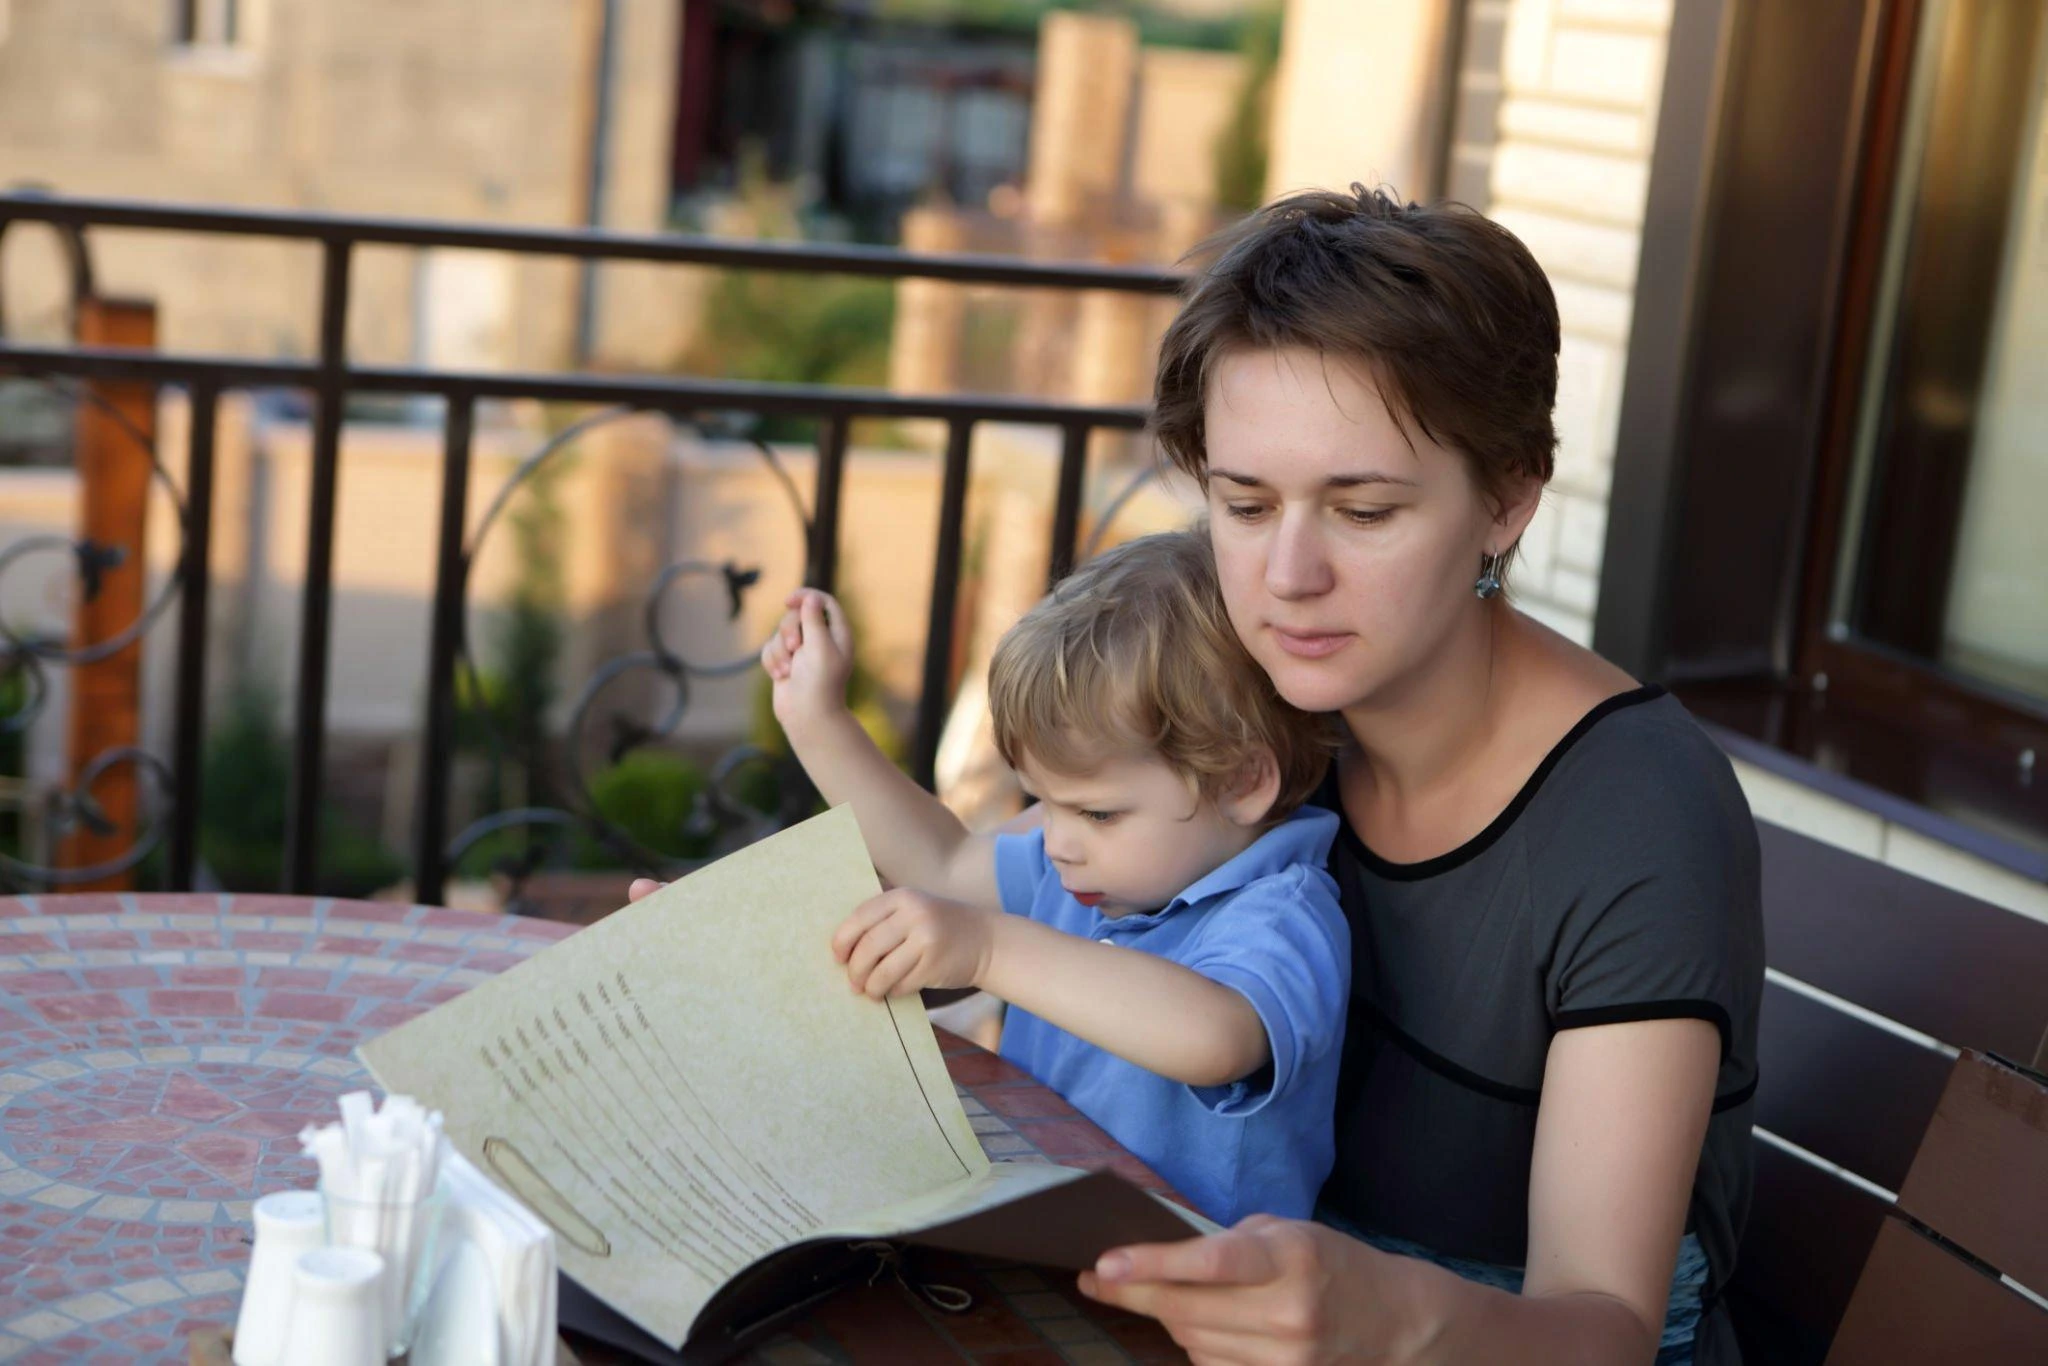 5 Sure Places to Find Free Legal Assistance for Single Moms